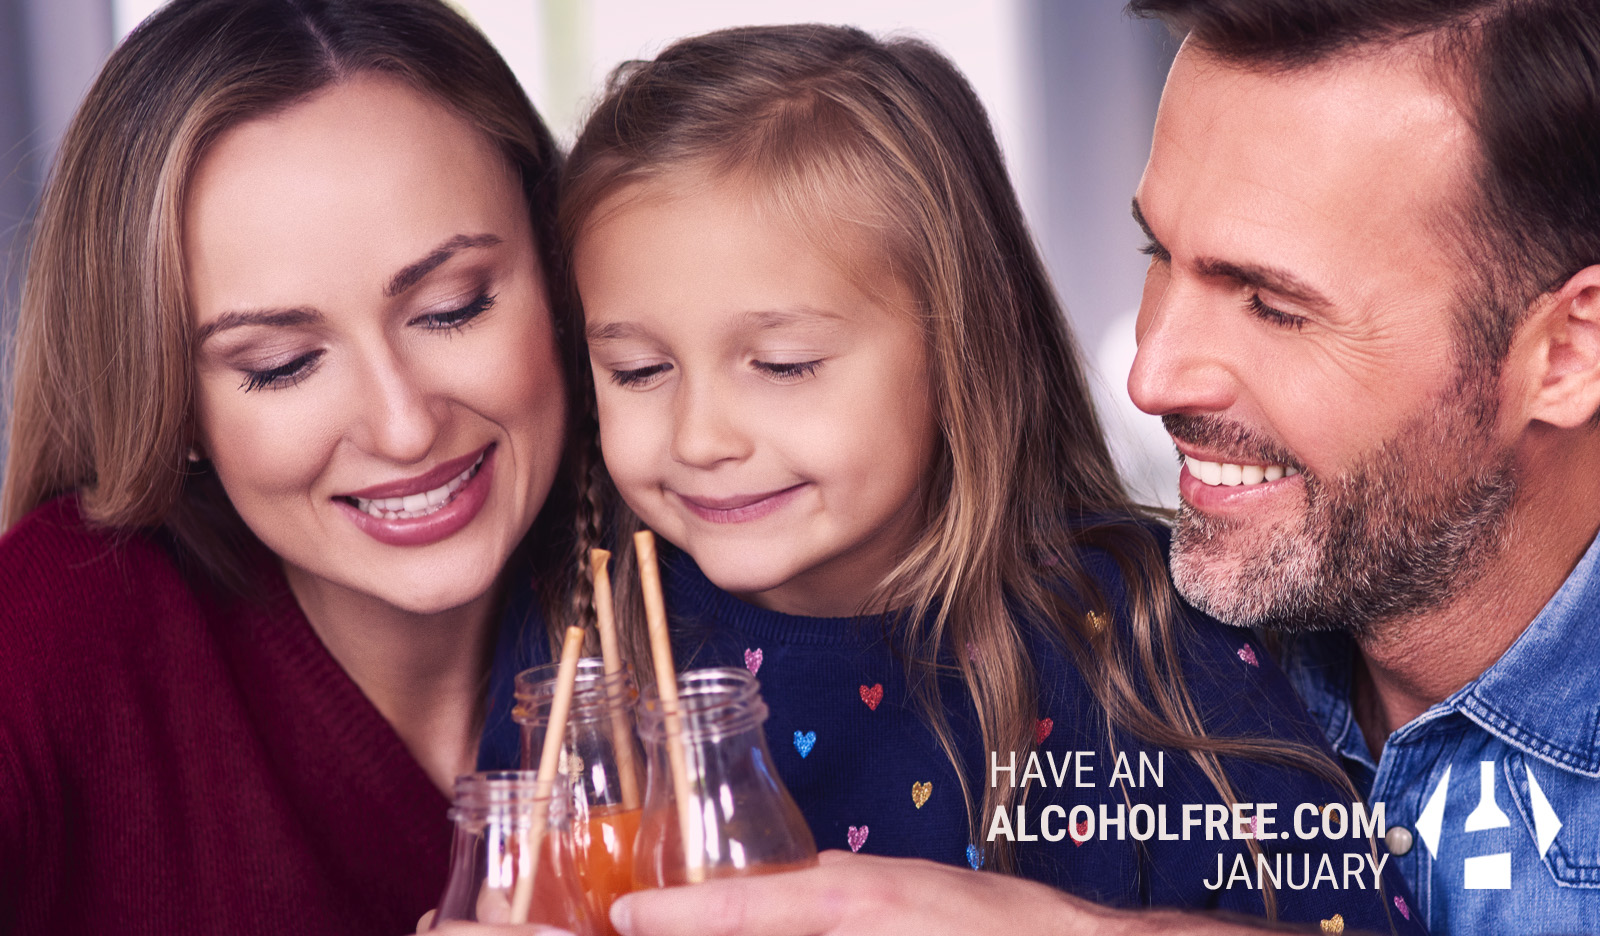 A family enjoying non-alcoholic drinks together